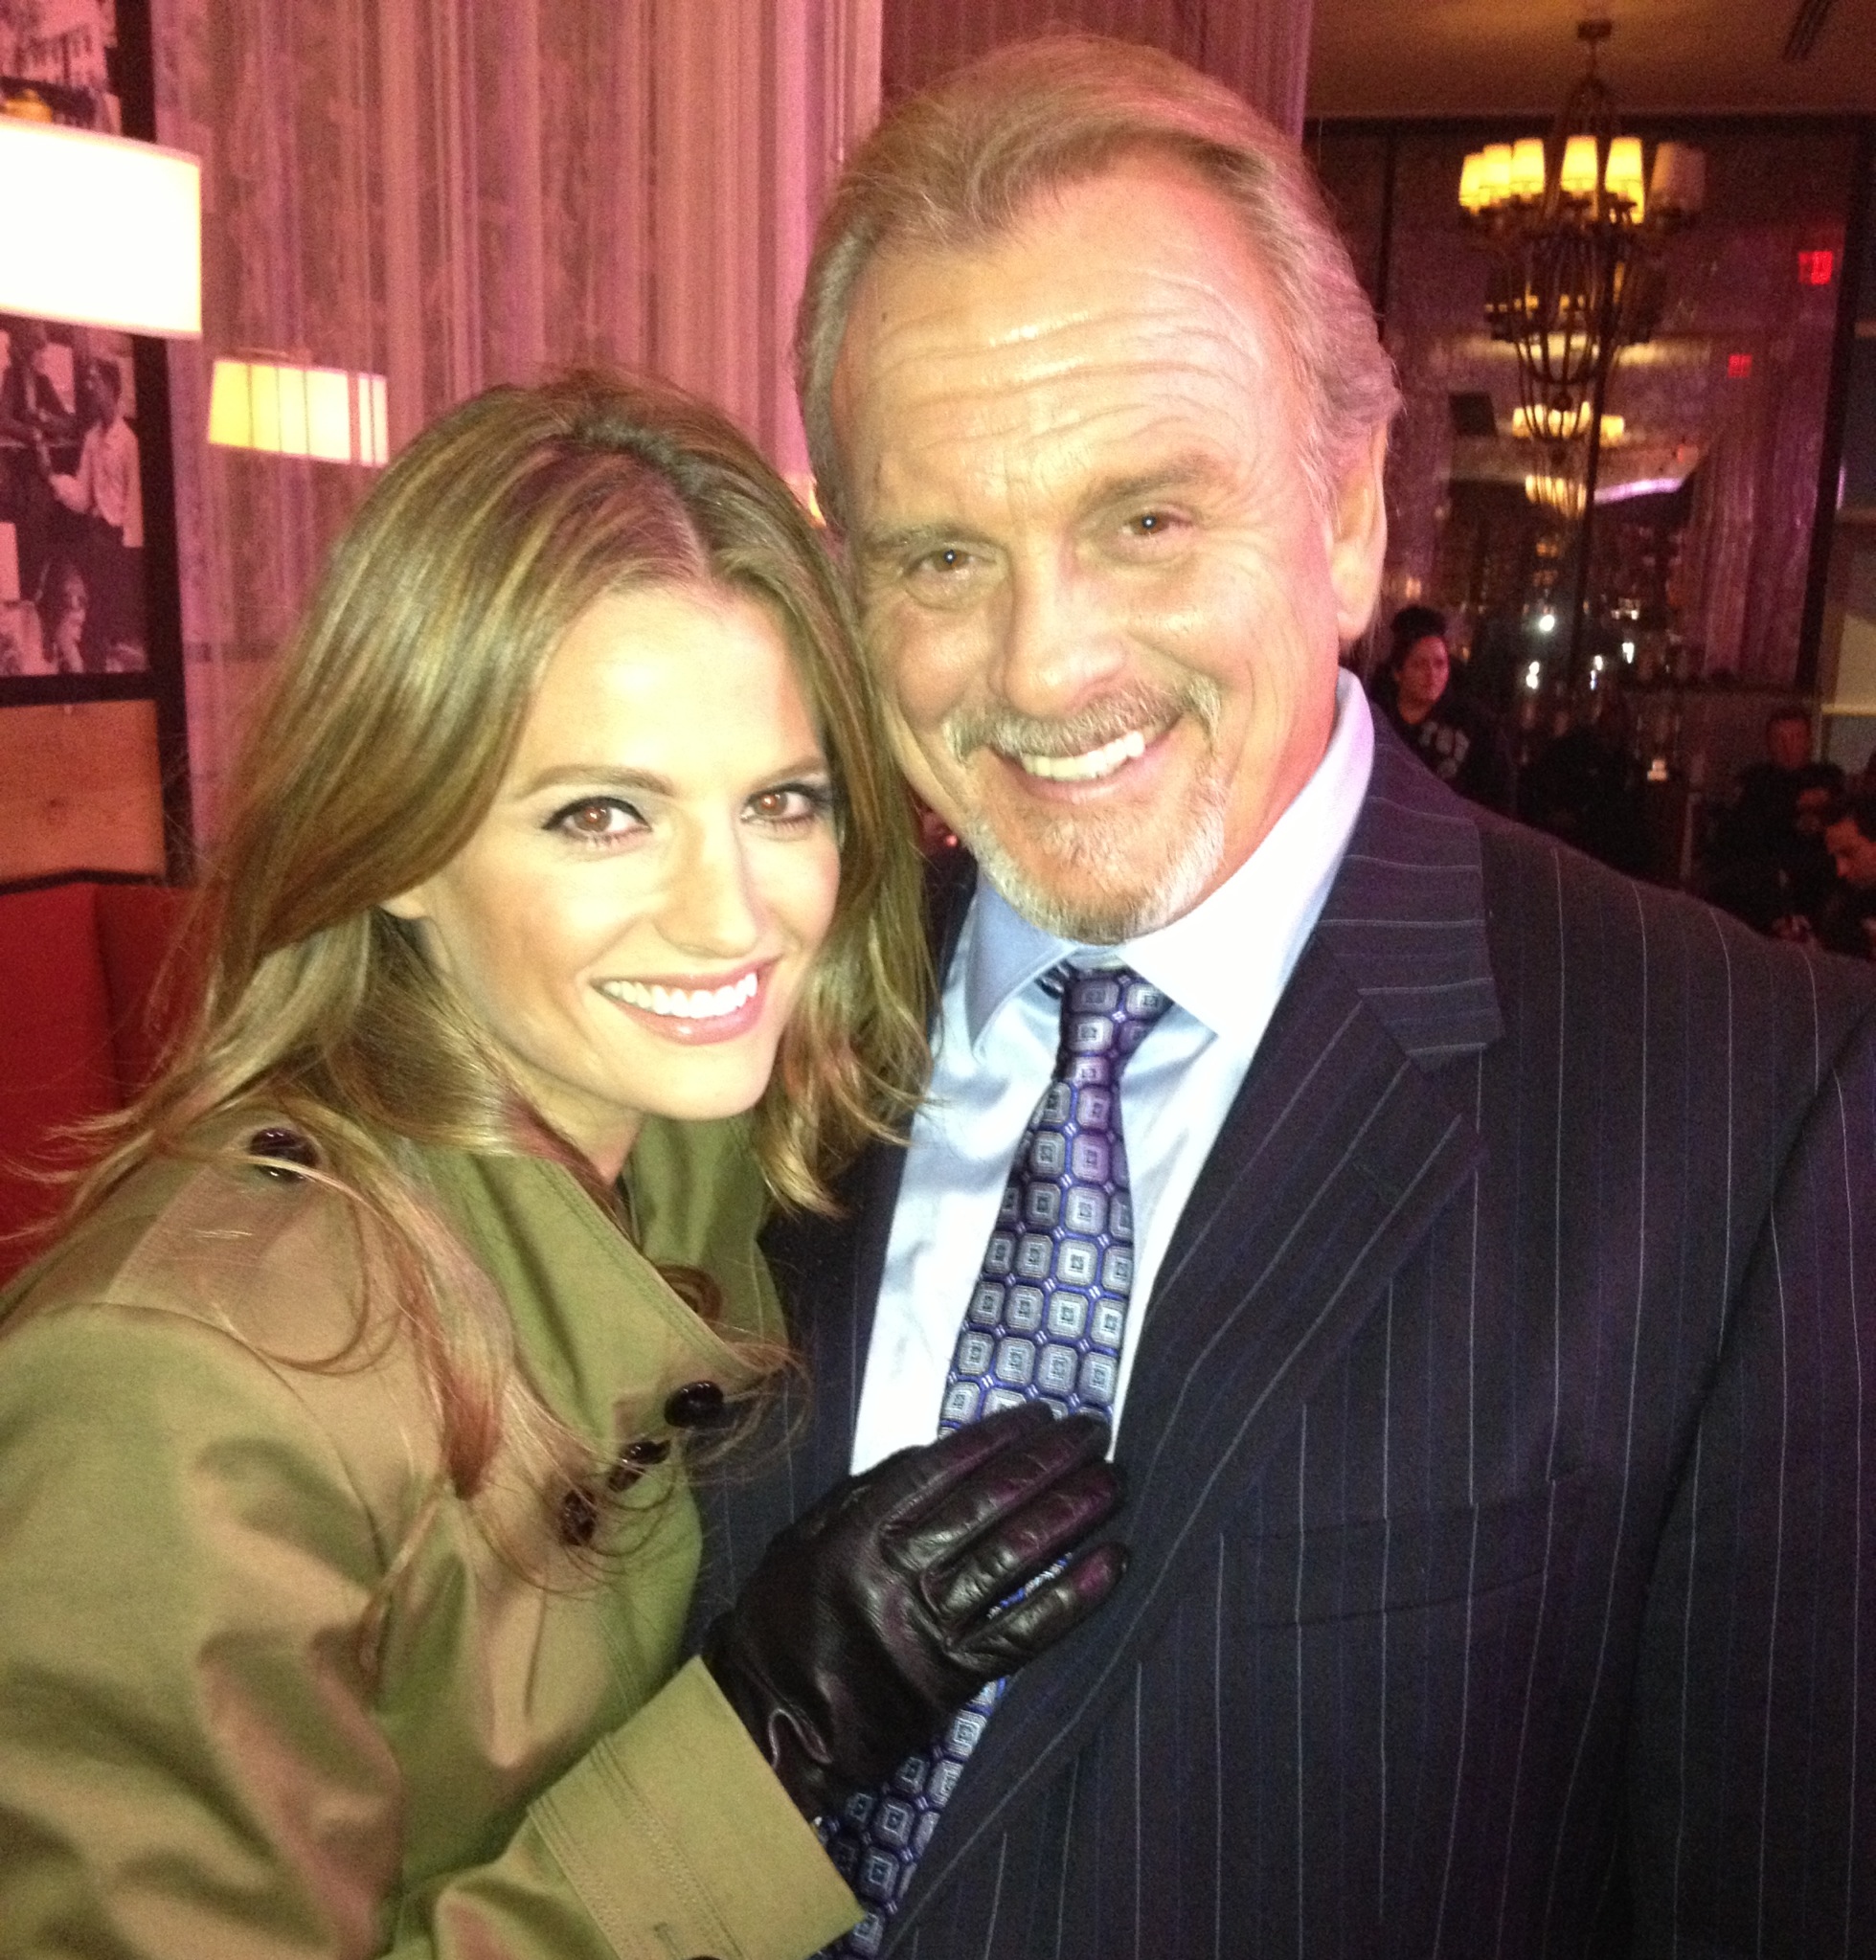 Robert Craighead with Stana Katic on the set of CASTLE, 2013.